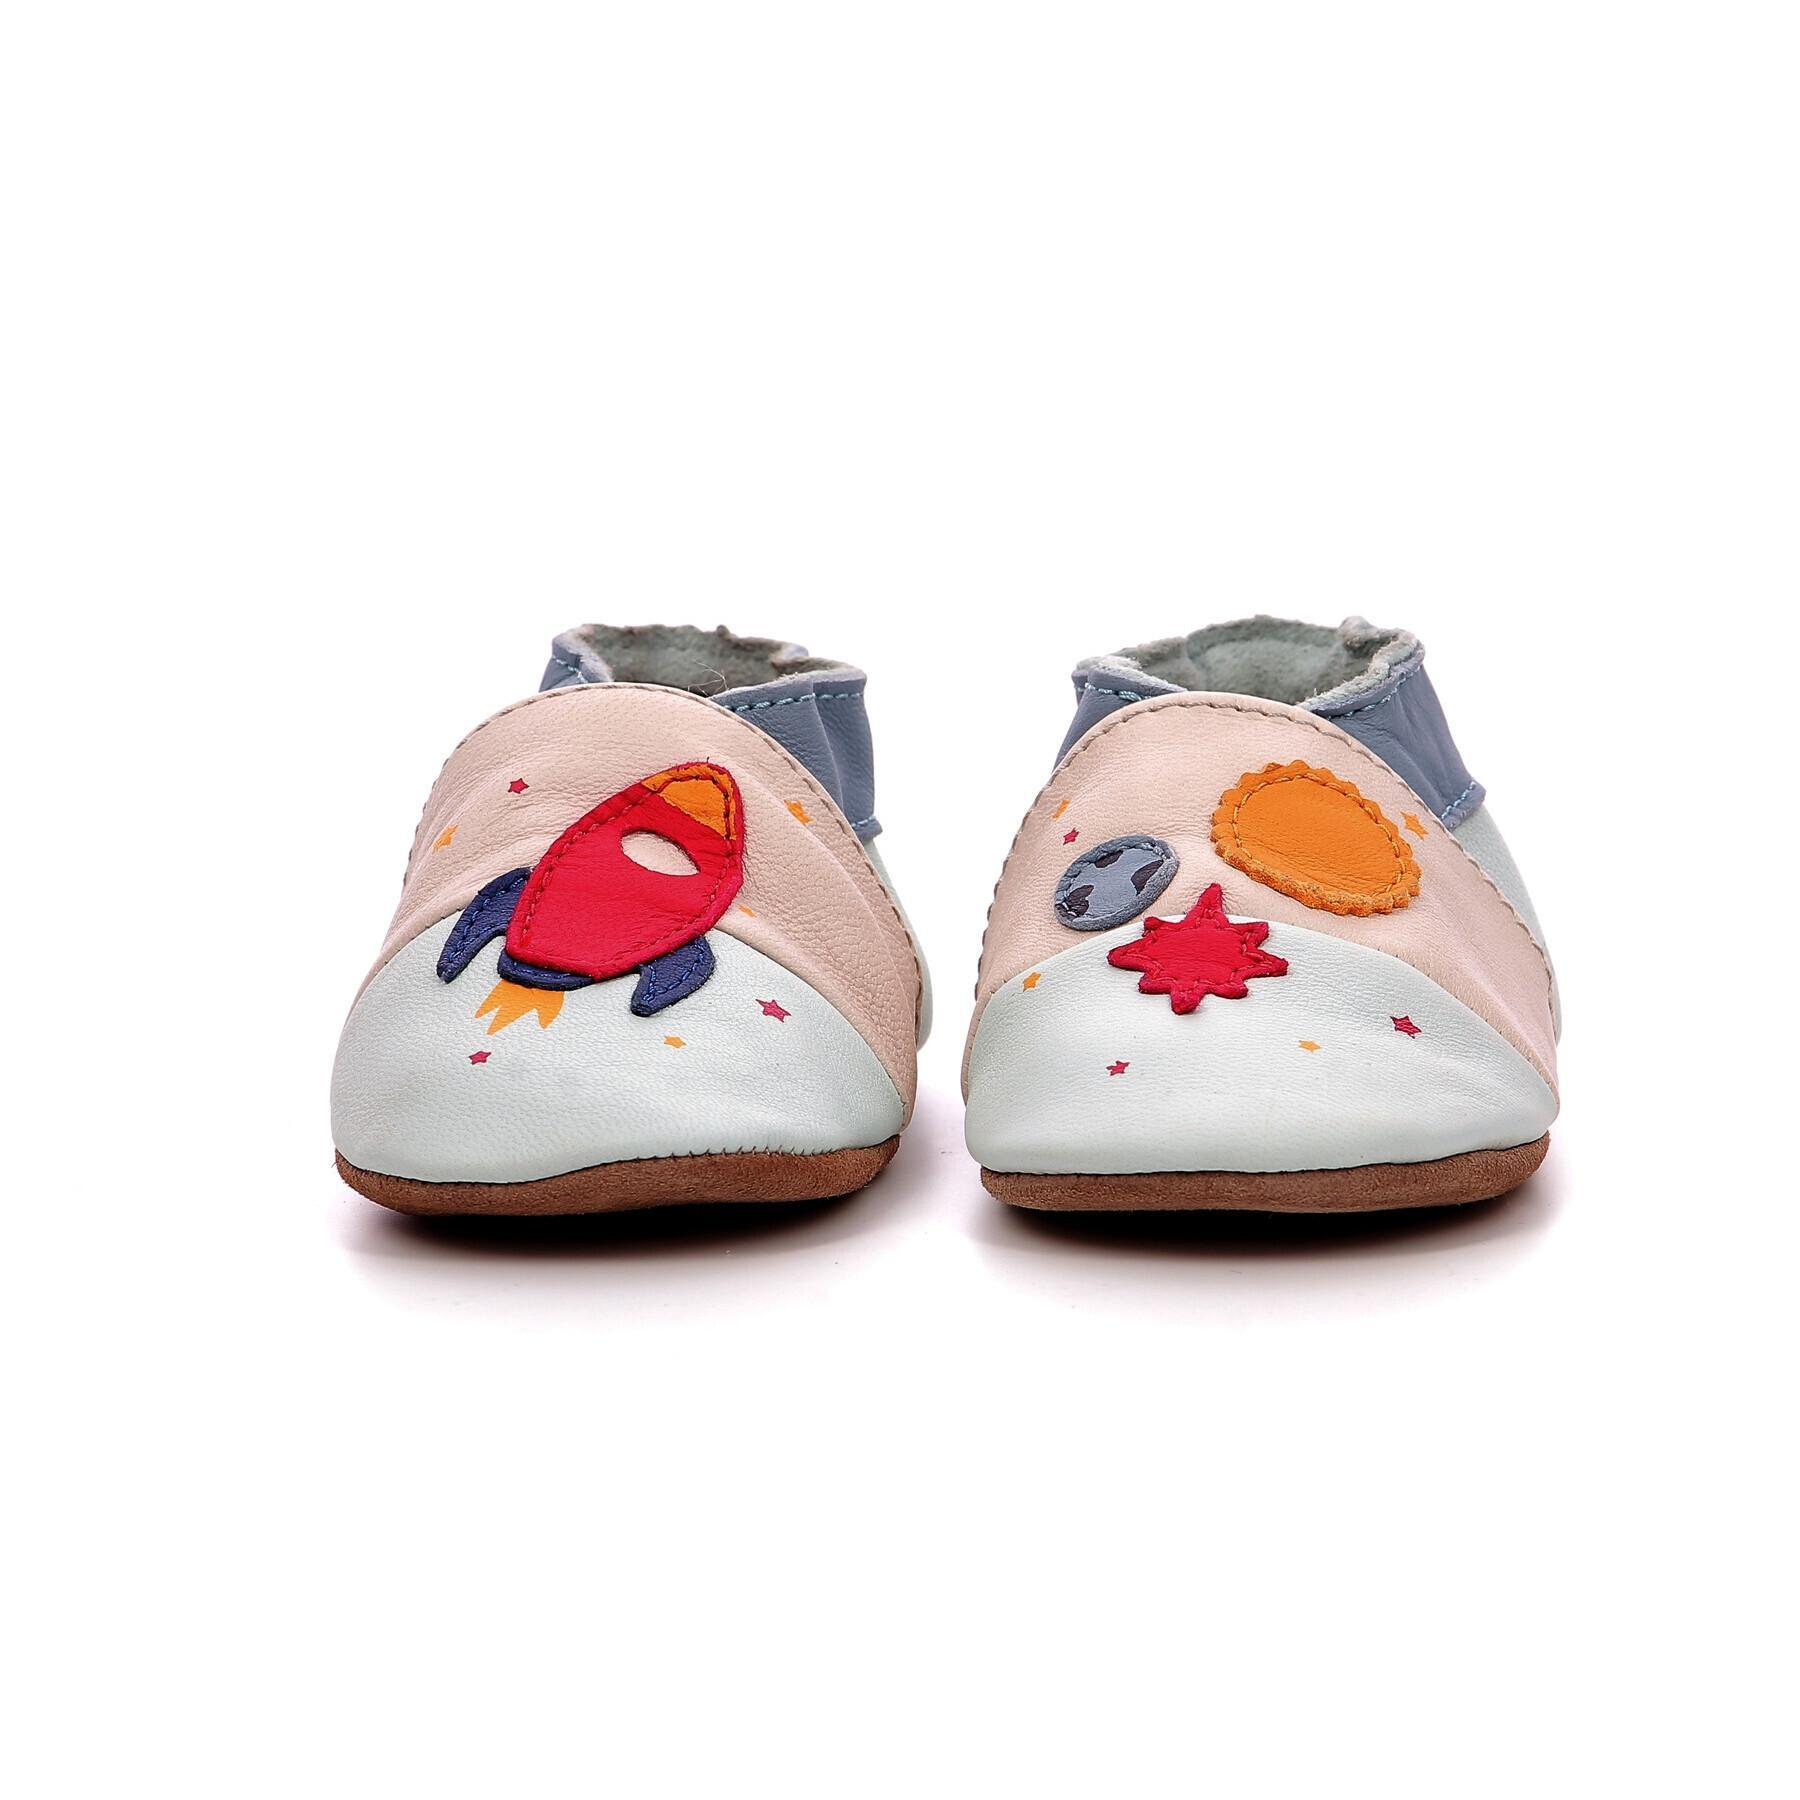 Baby boy slippers Robeez Deep Space Area